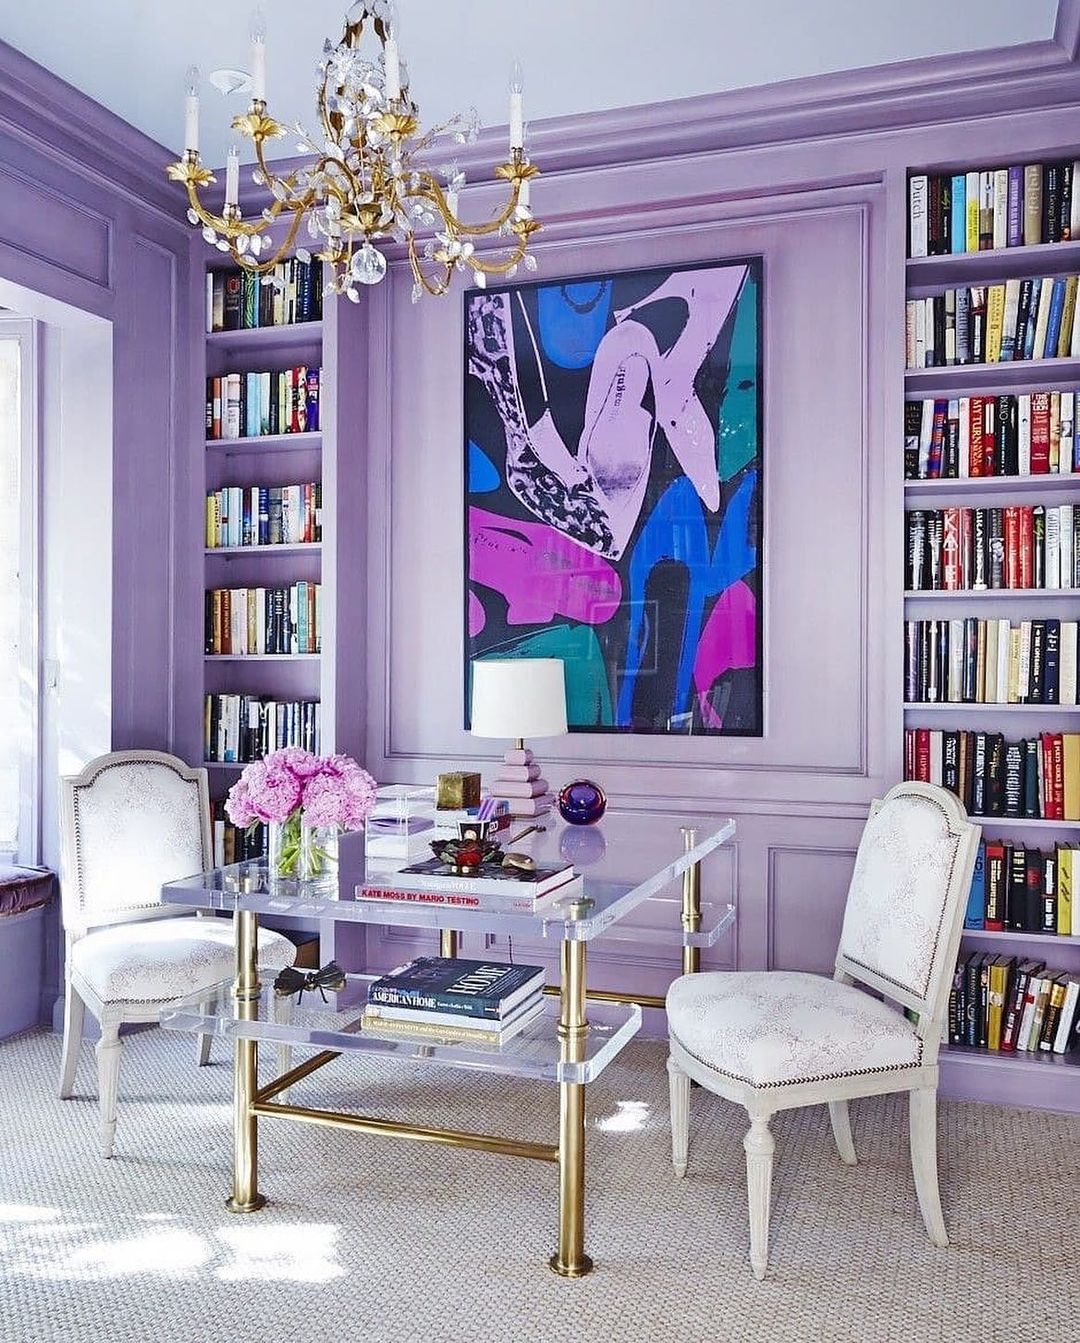 Purple Sitting Room with Books on Shelves in Southeast Feng Shui Direction. Photo by Instagram user @roomhomestyling